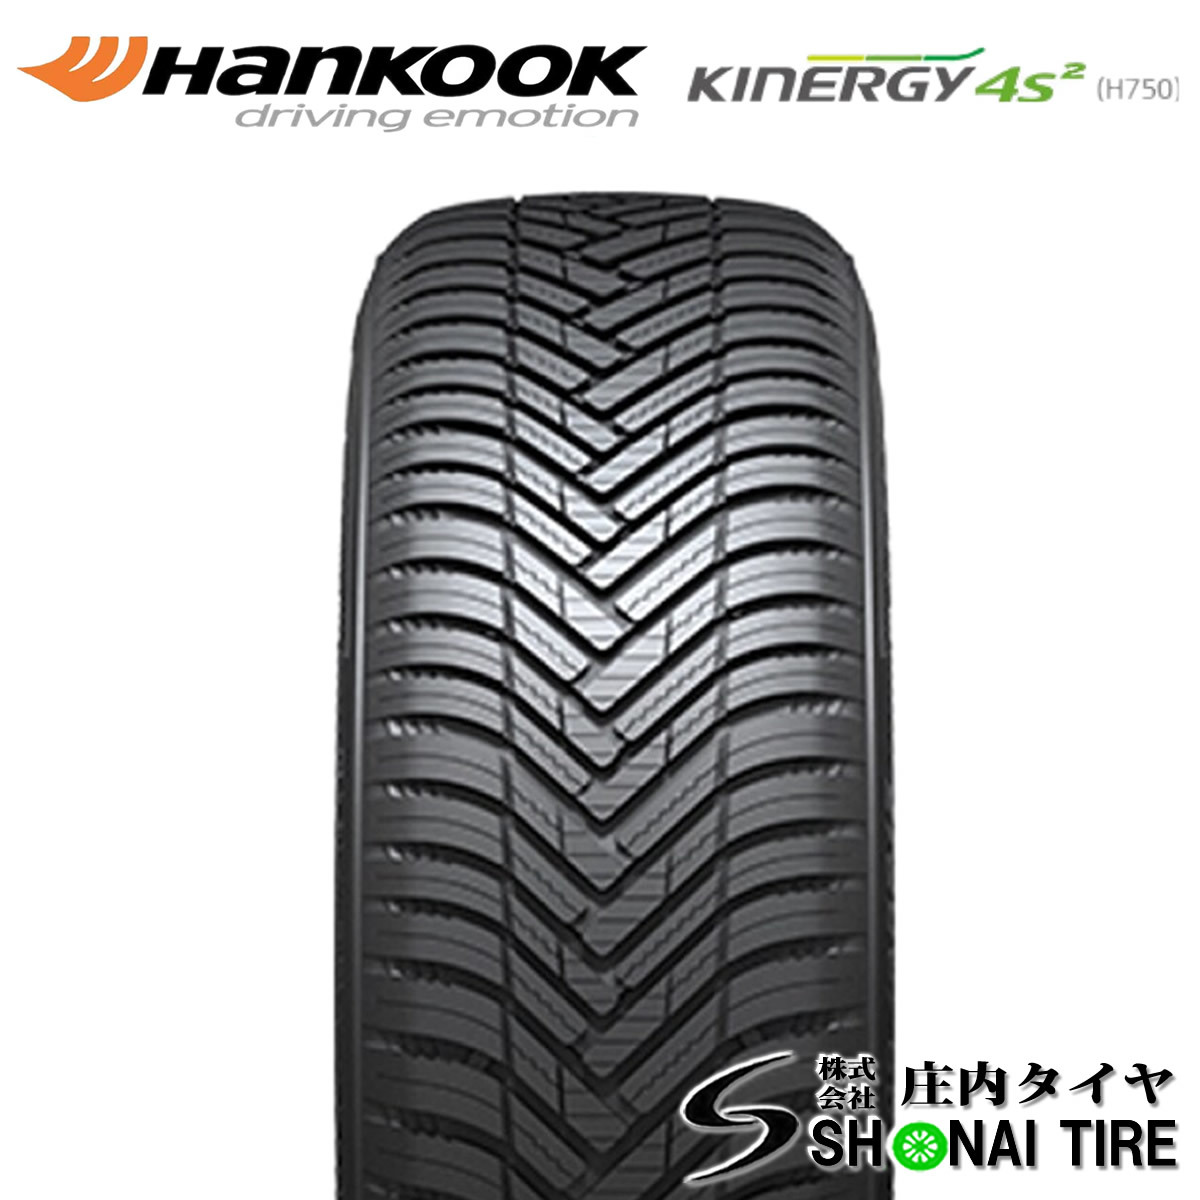  stock necessary verification company addressed to free shipping Hankook KINERGY 4S 2 H750 195/65R15 95H XL summer 1 pcs price Serena VOXY Prius Esquire NO,HK003-1